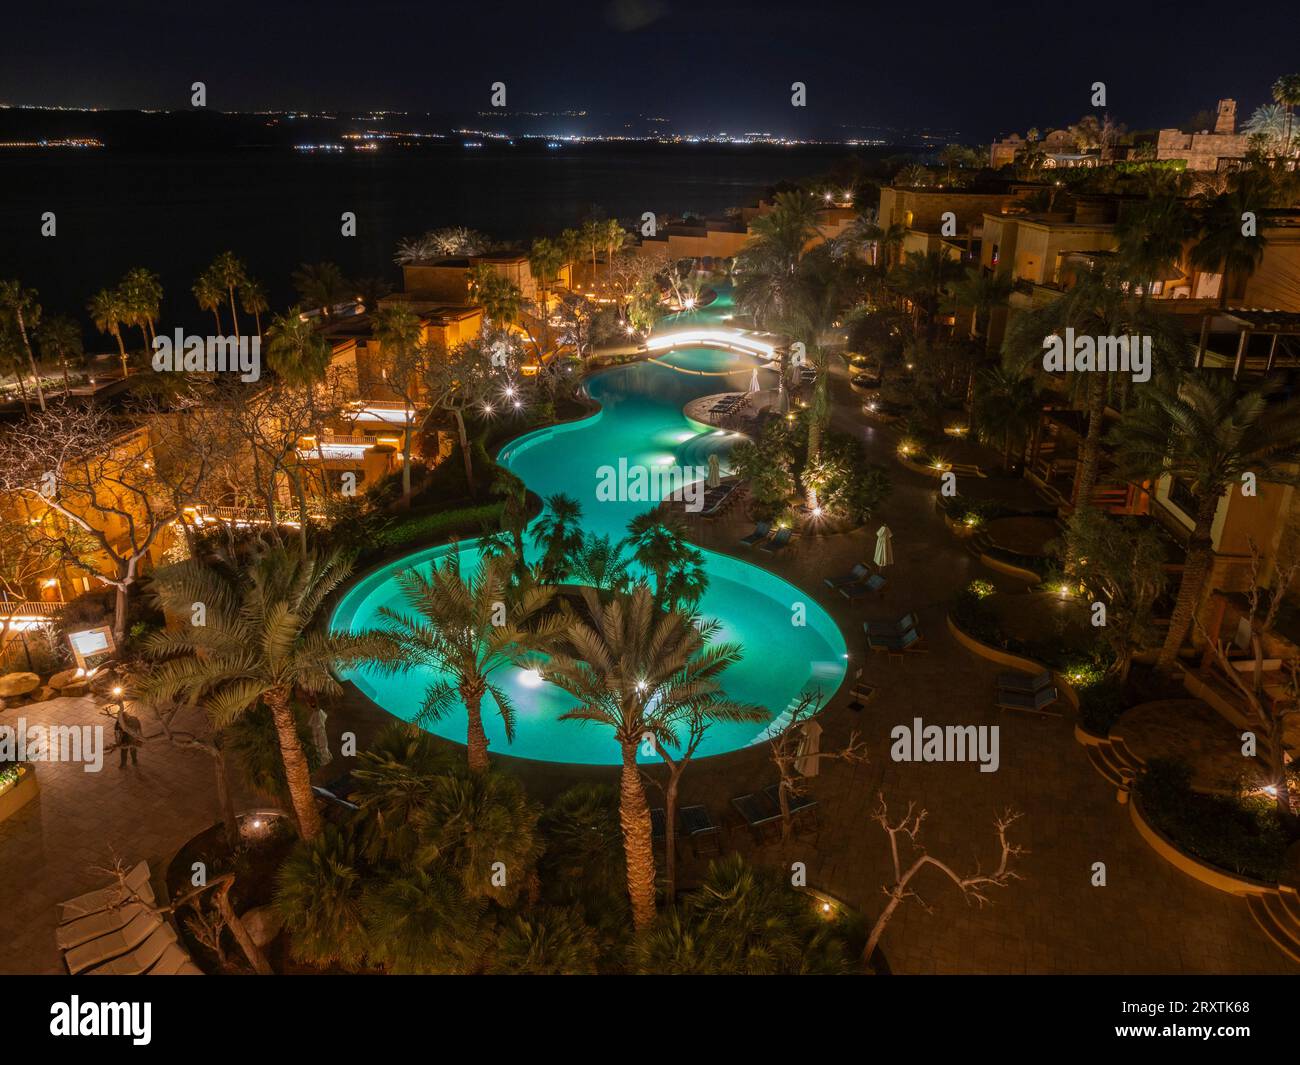 Night at the Kempinski Hotel Ishtar, a five-star luxury resort by the Dead Sea inspired by the Hanging Gardens of Babylon, Jordan, Middle East Stock Photo